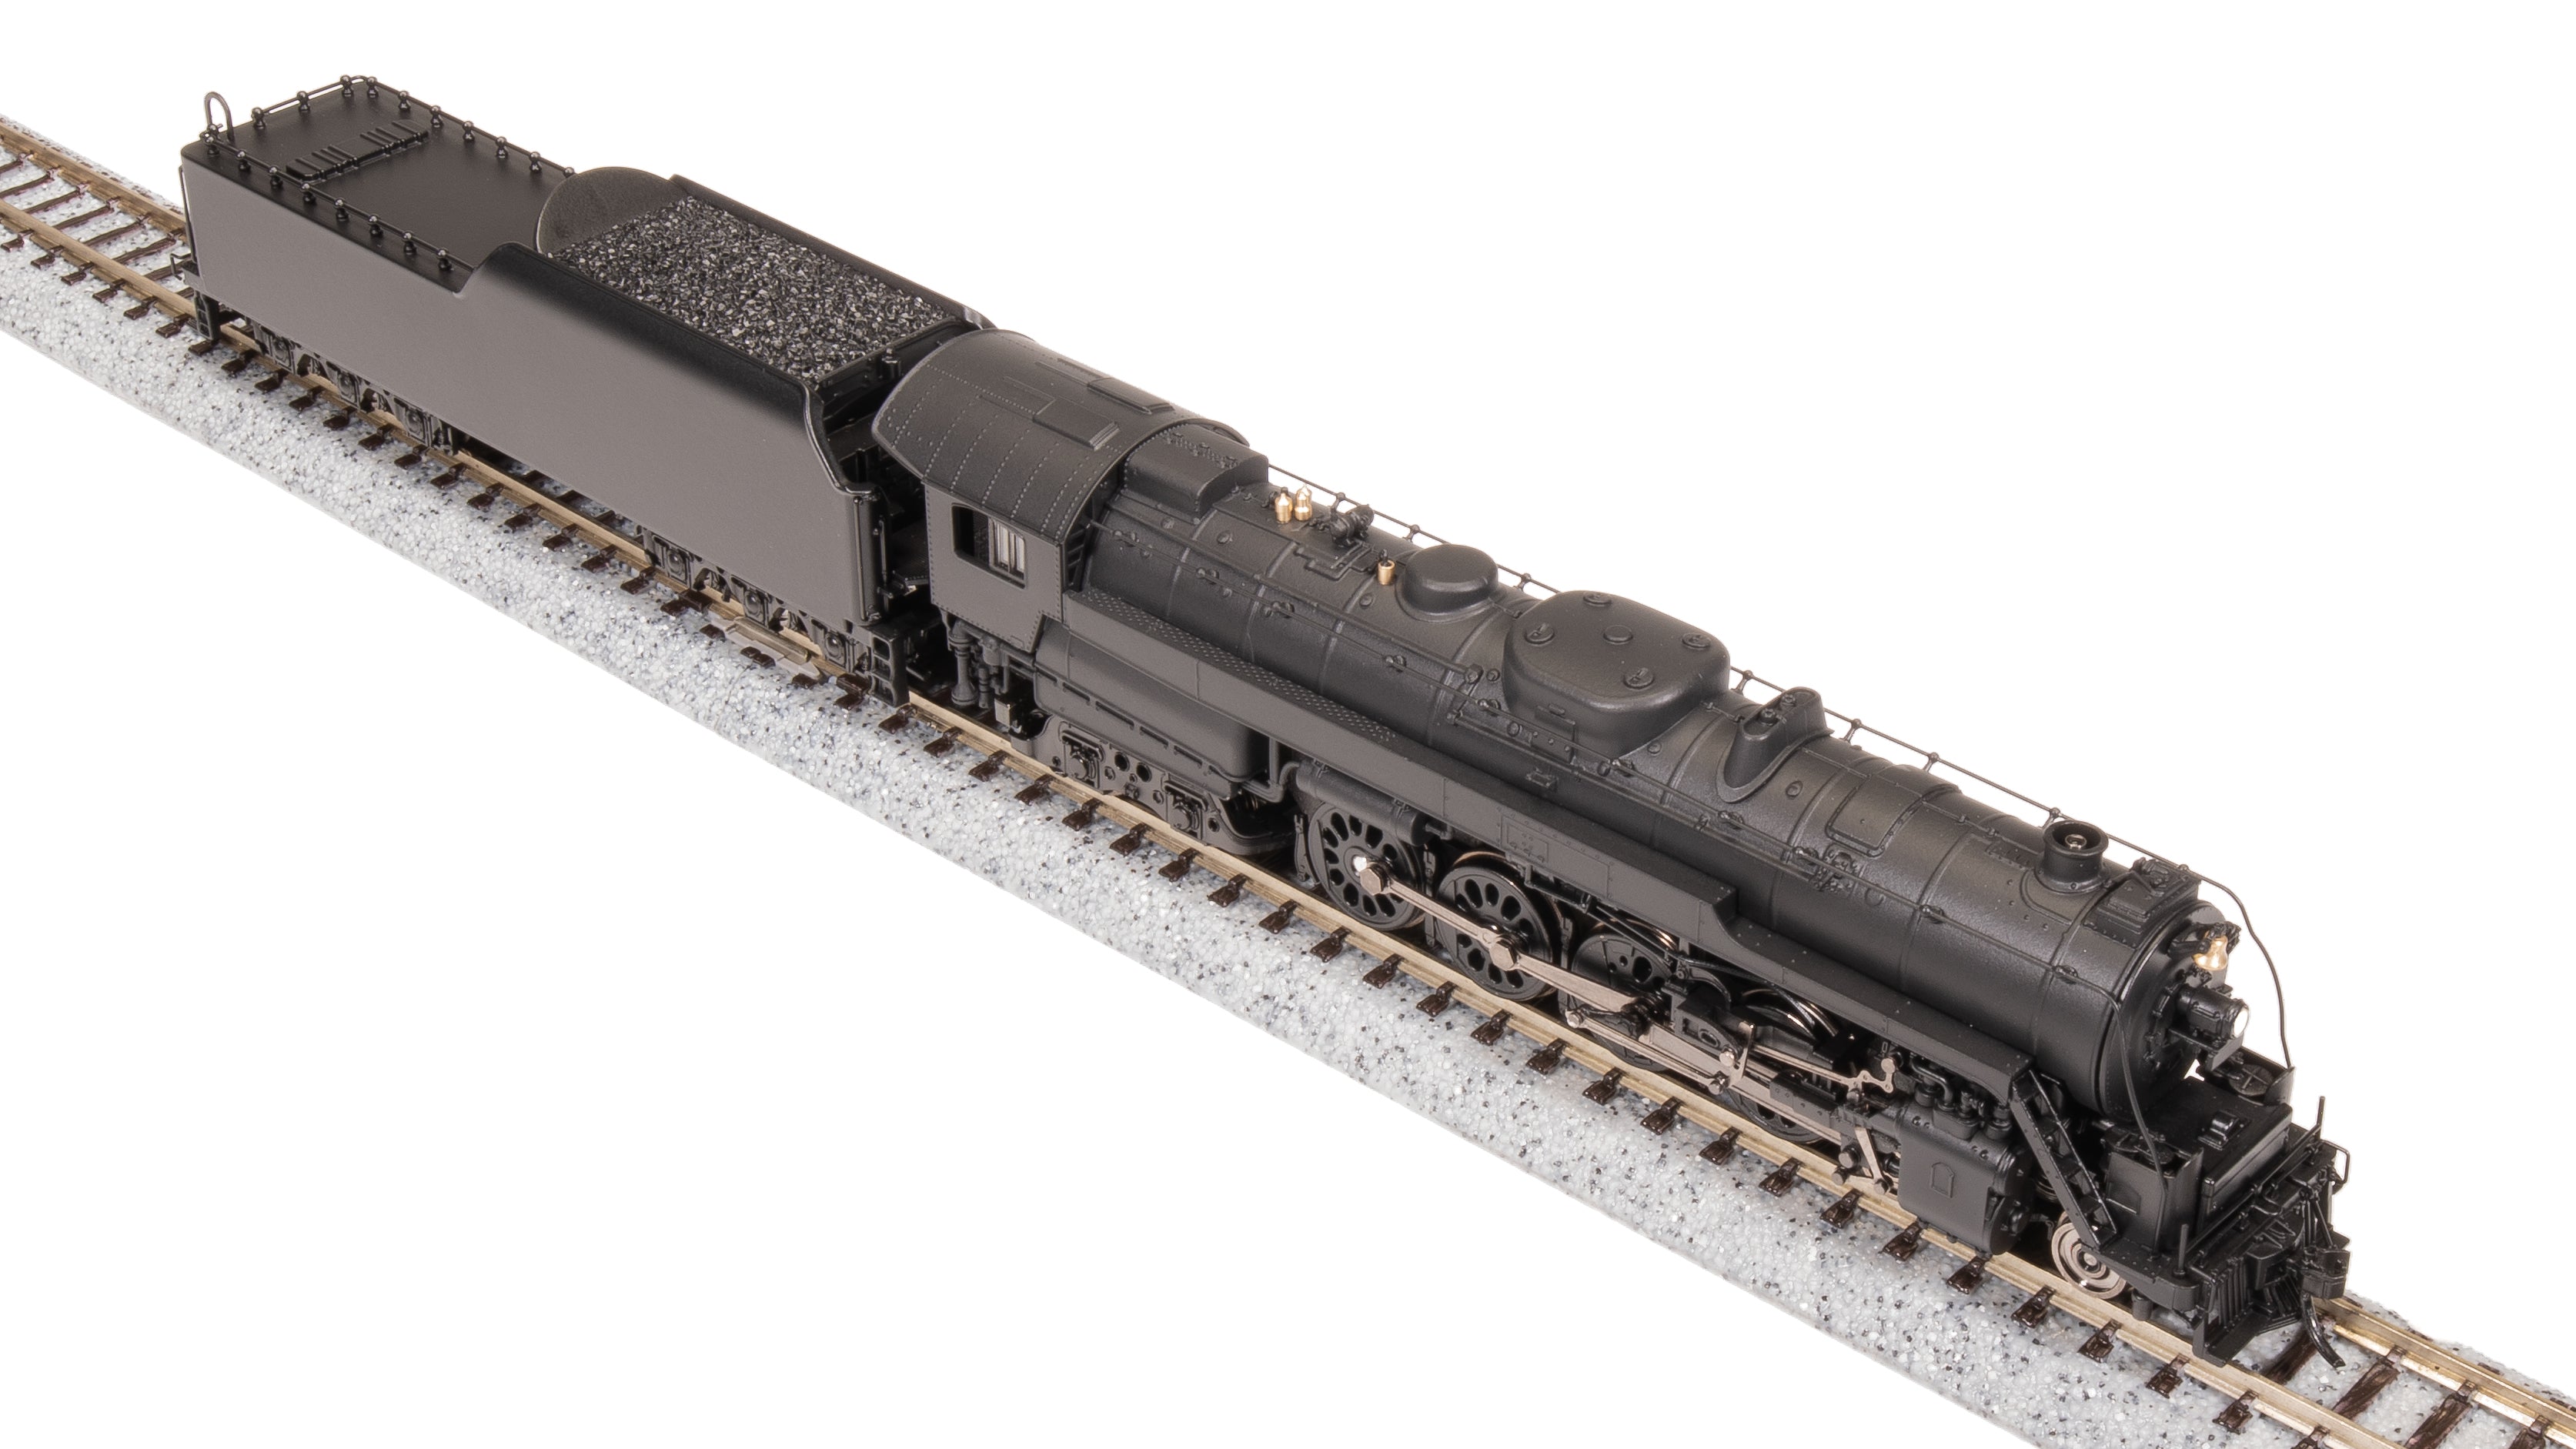 7413 Reading T1 4-8-4, Unlettered, Paragon4 Sound/DC/DCC, Smoke, N